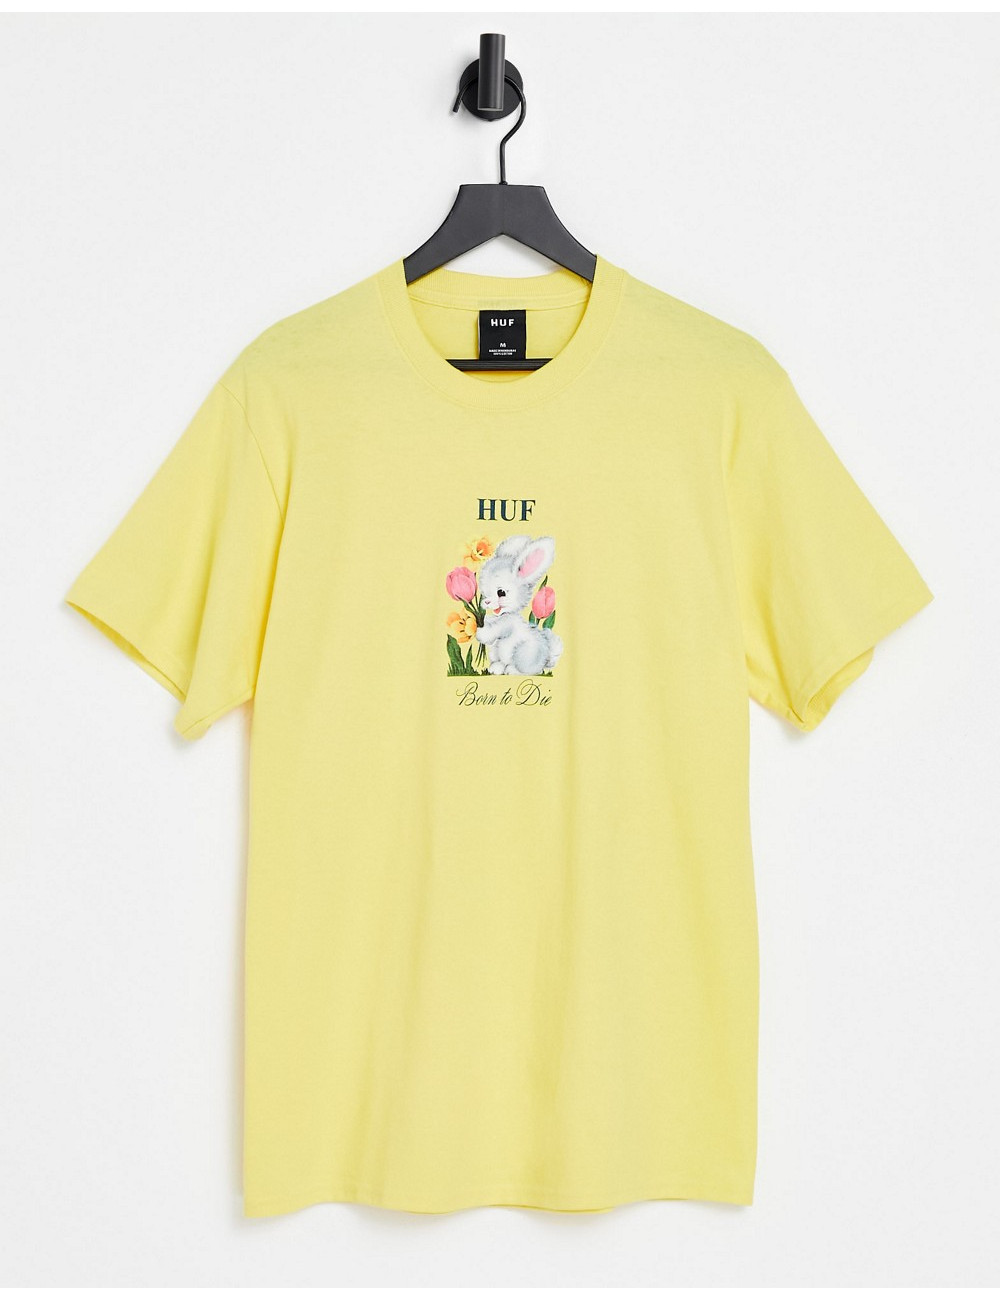 HUF born to die t-shirt in...